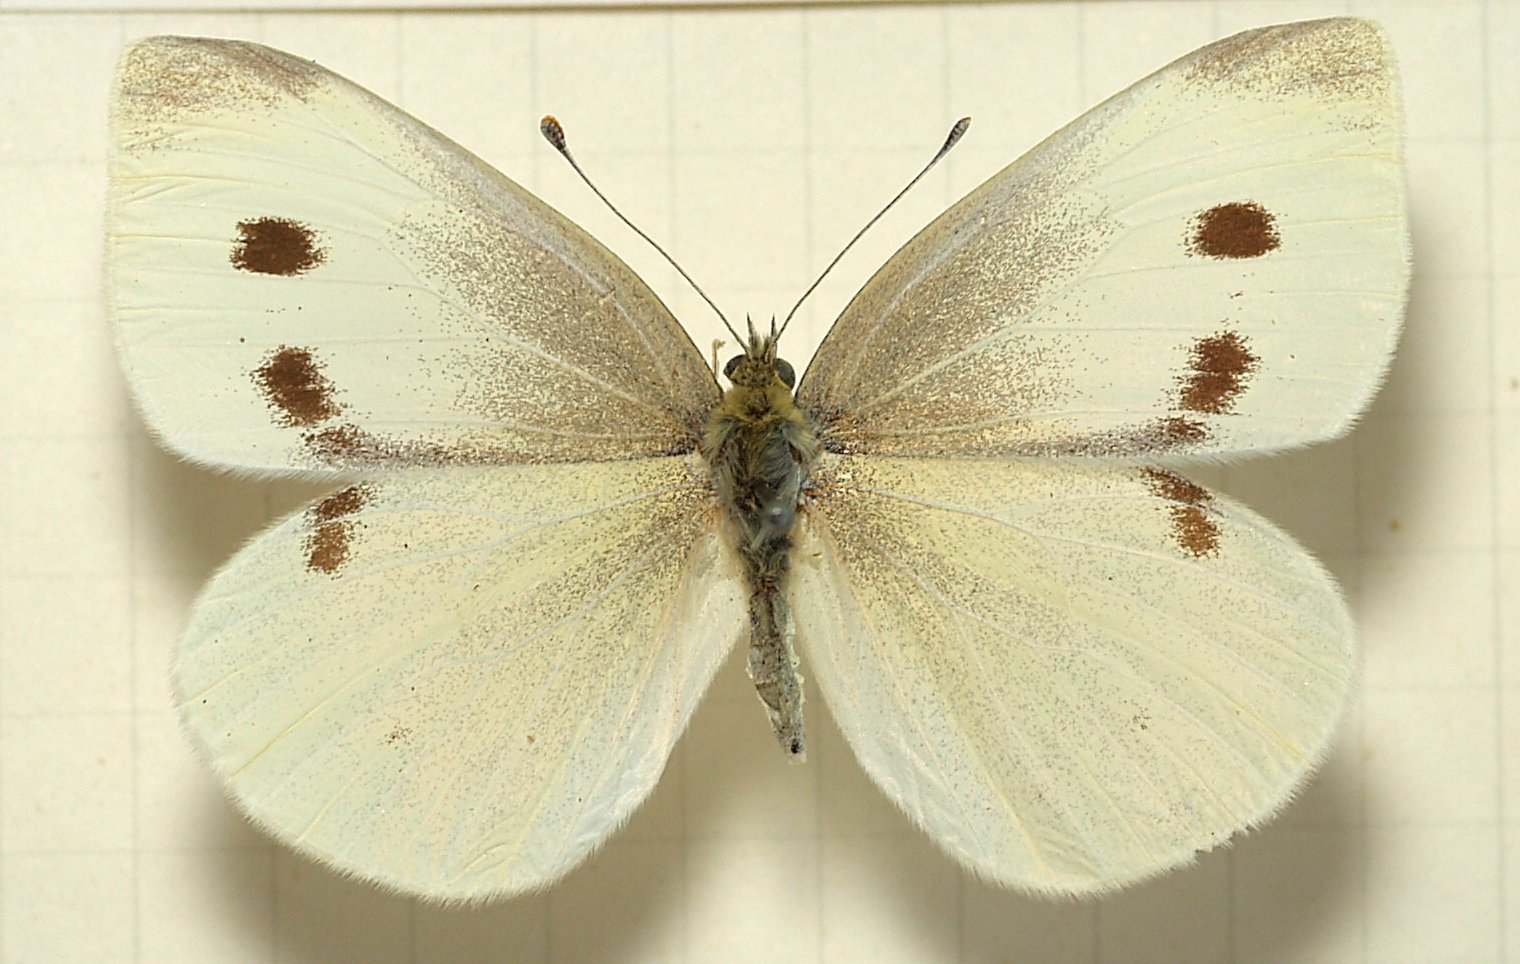 Why are they called cabbage white butterfly?